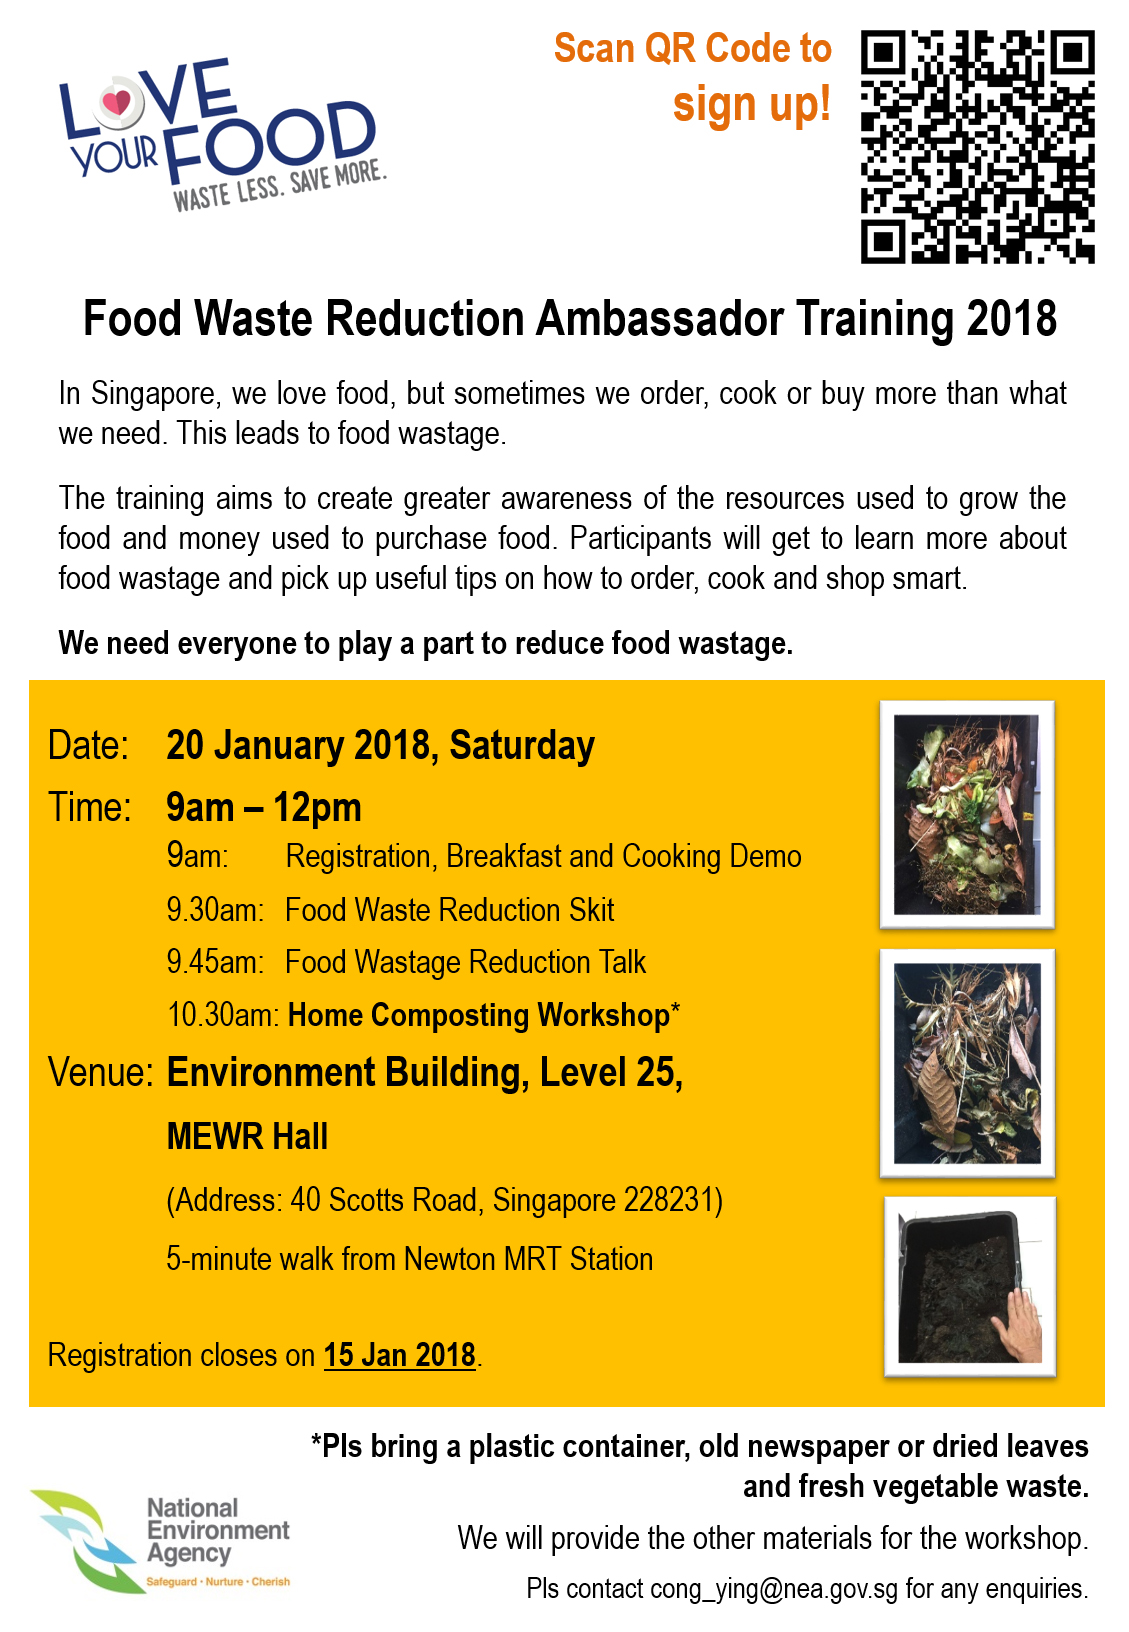 Food Waste Reduction Training Poster